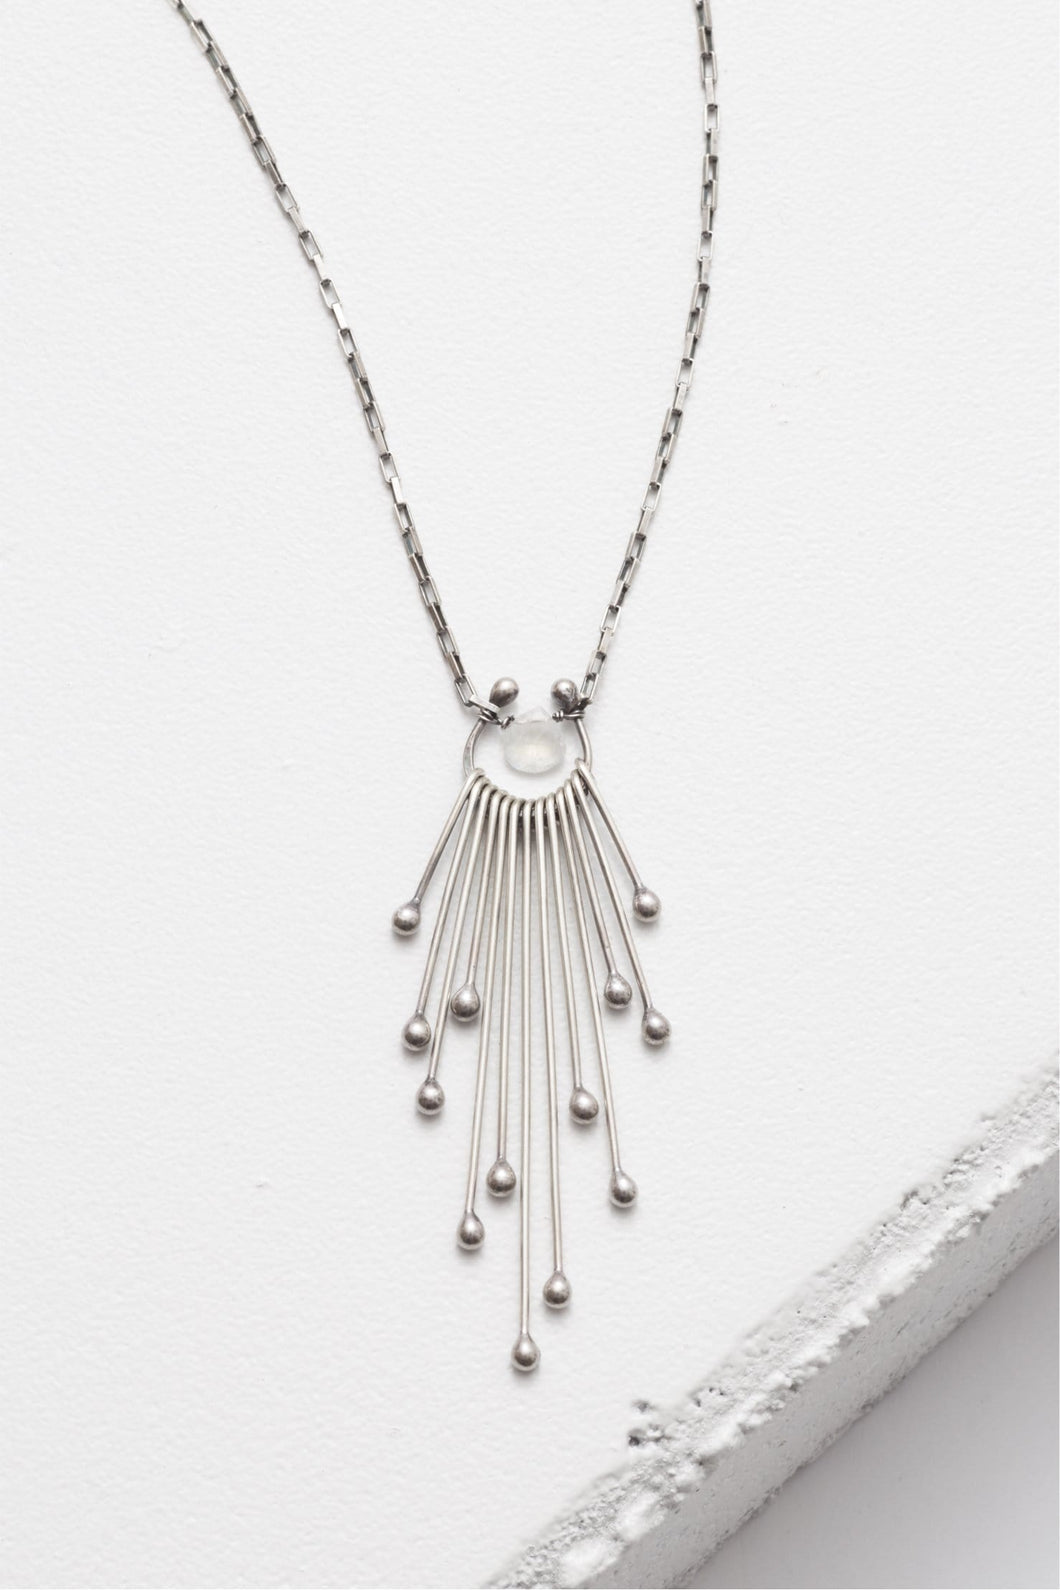 Matchstick Necklace - The Highlight Gallery